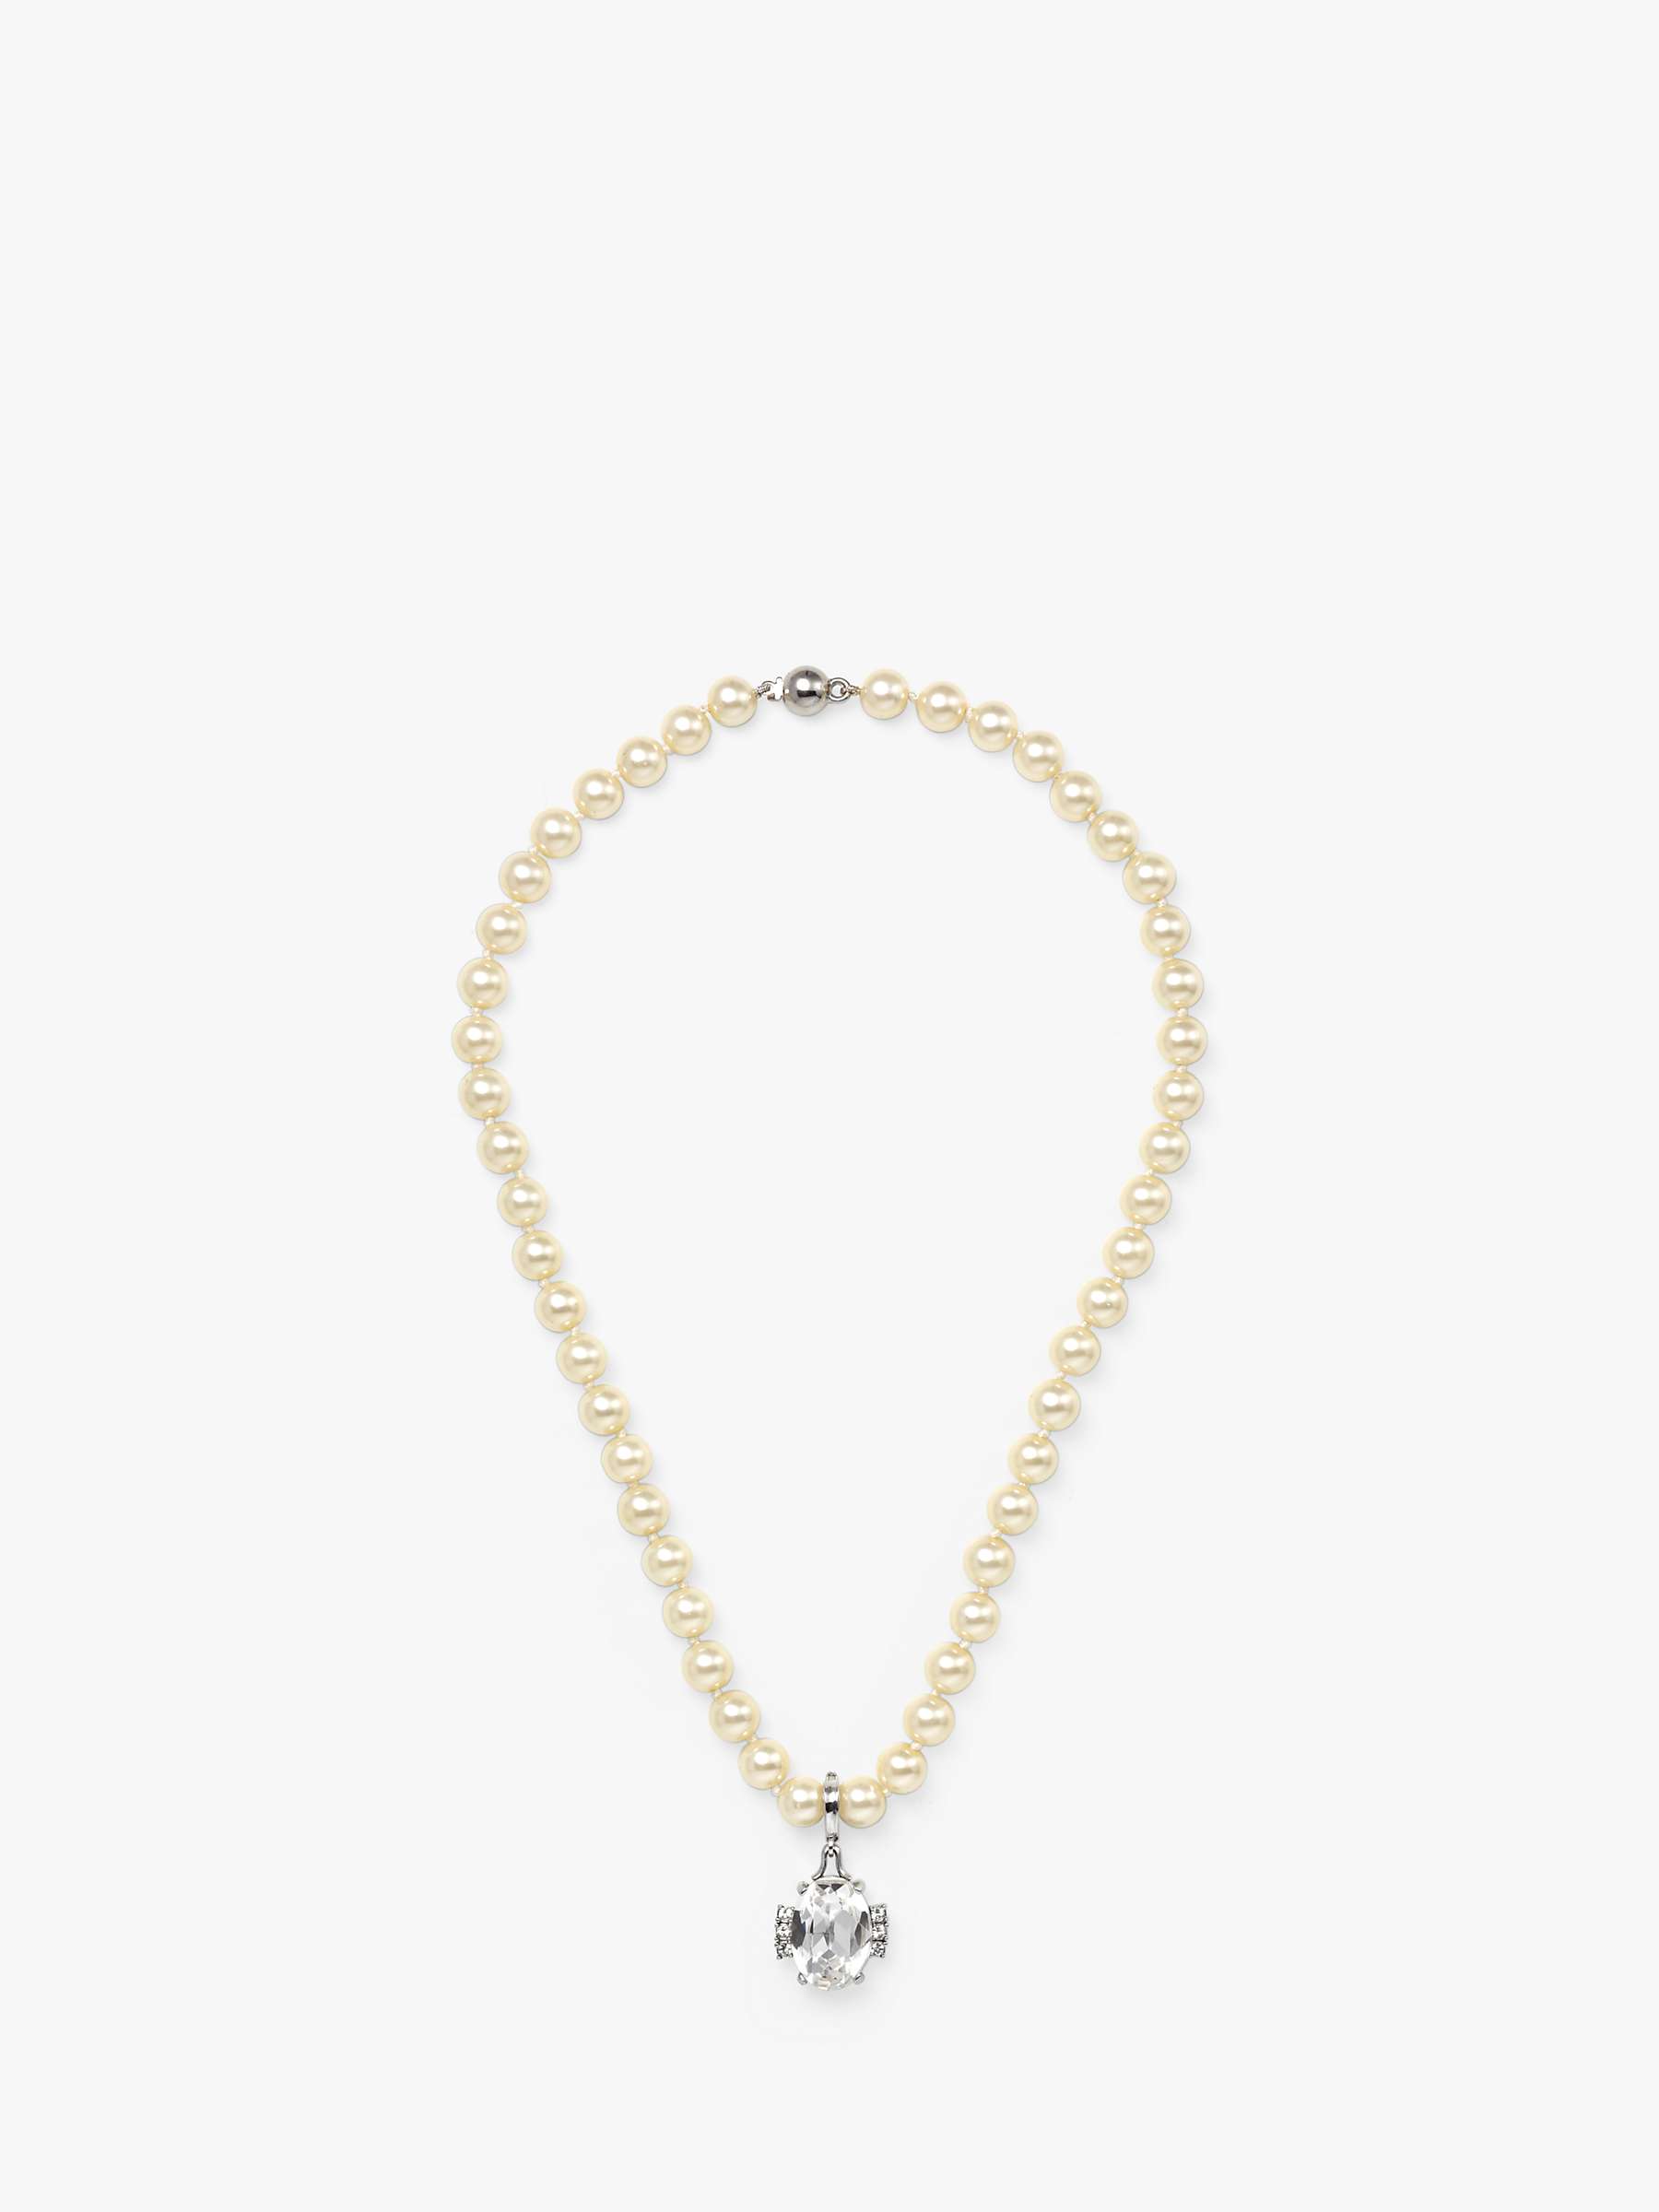 Buy Eclectica Vintage Swarovski Crystal Faux Pearl Necklace, Dated Circa 1980s Online at johnlewis.com